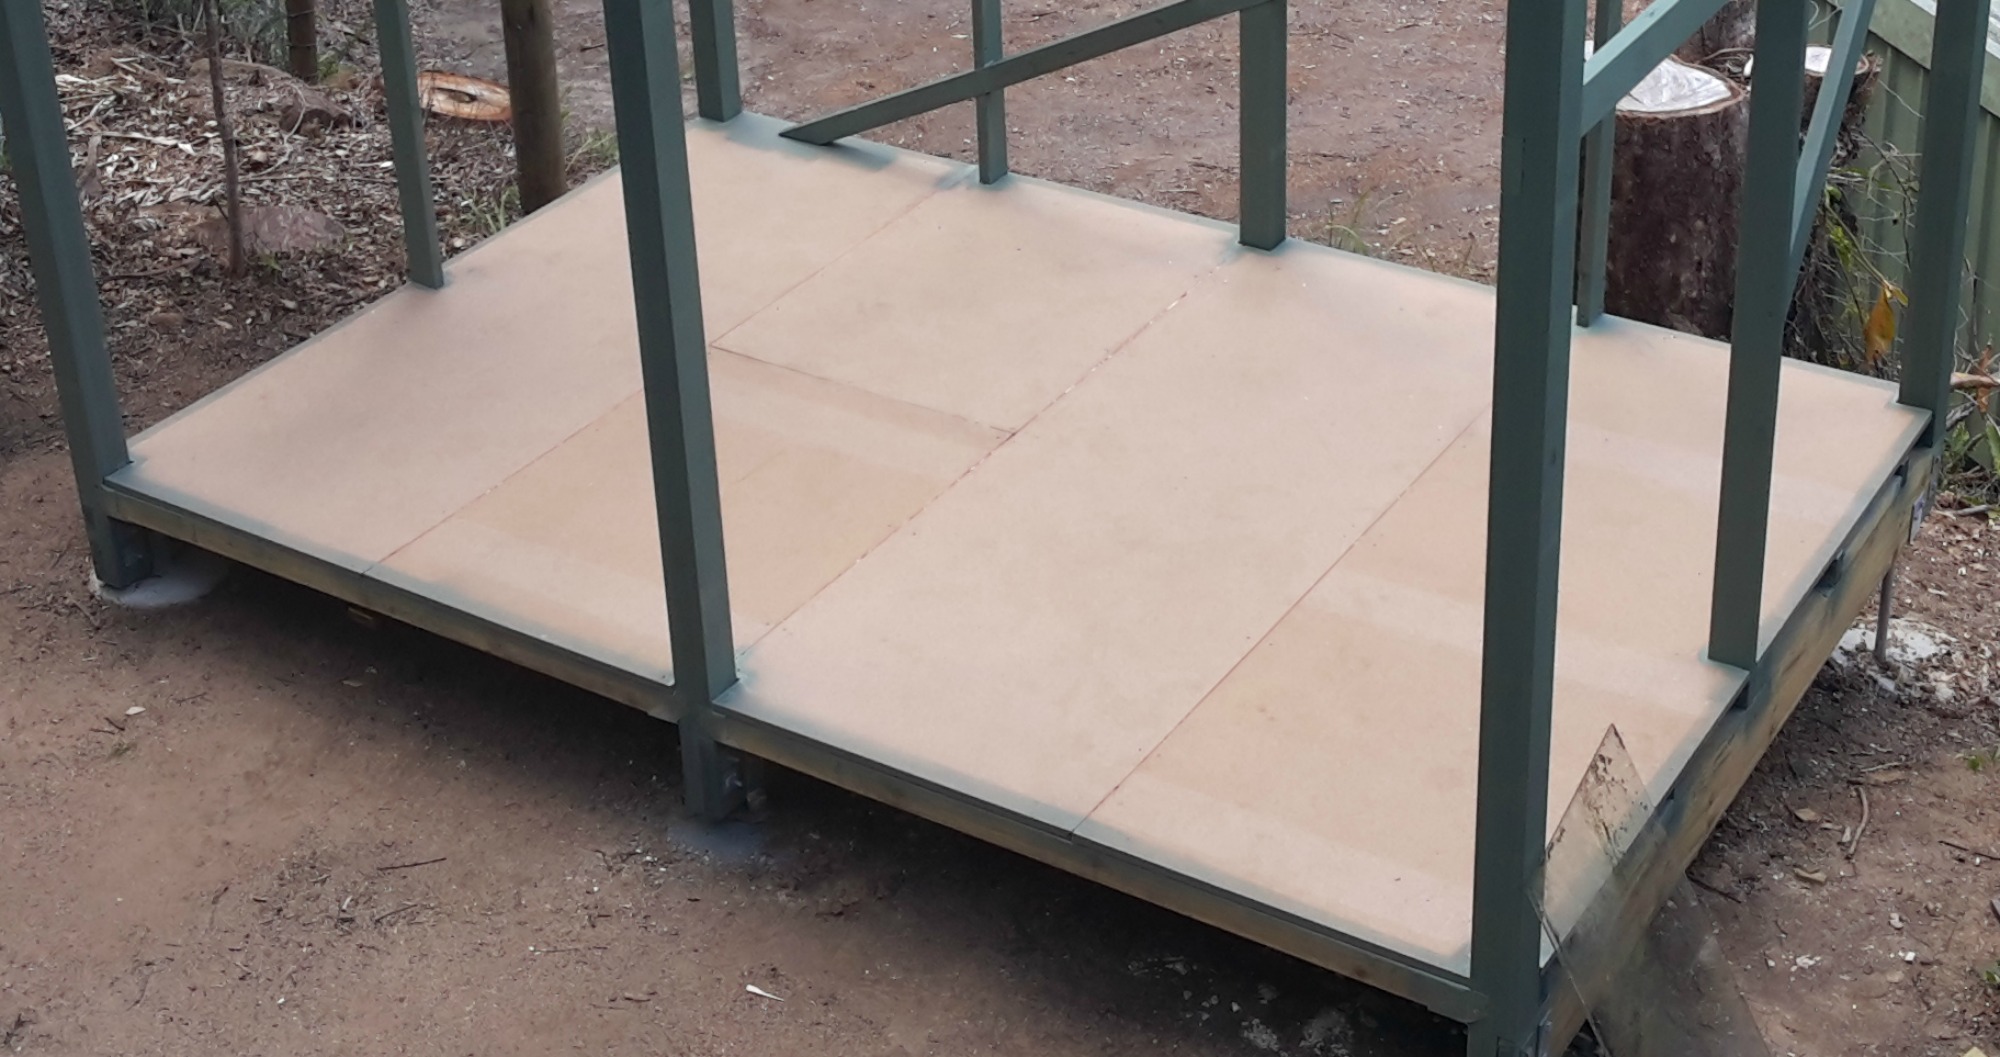 Build a Shed with a Raised Floor System